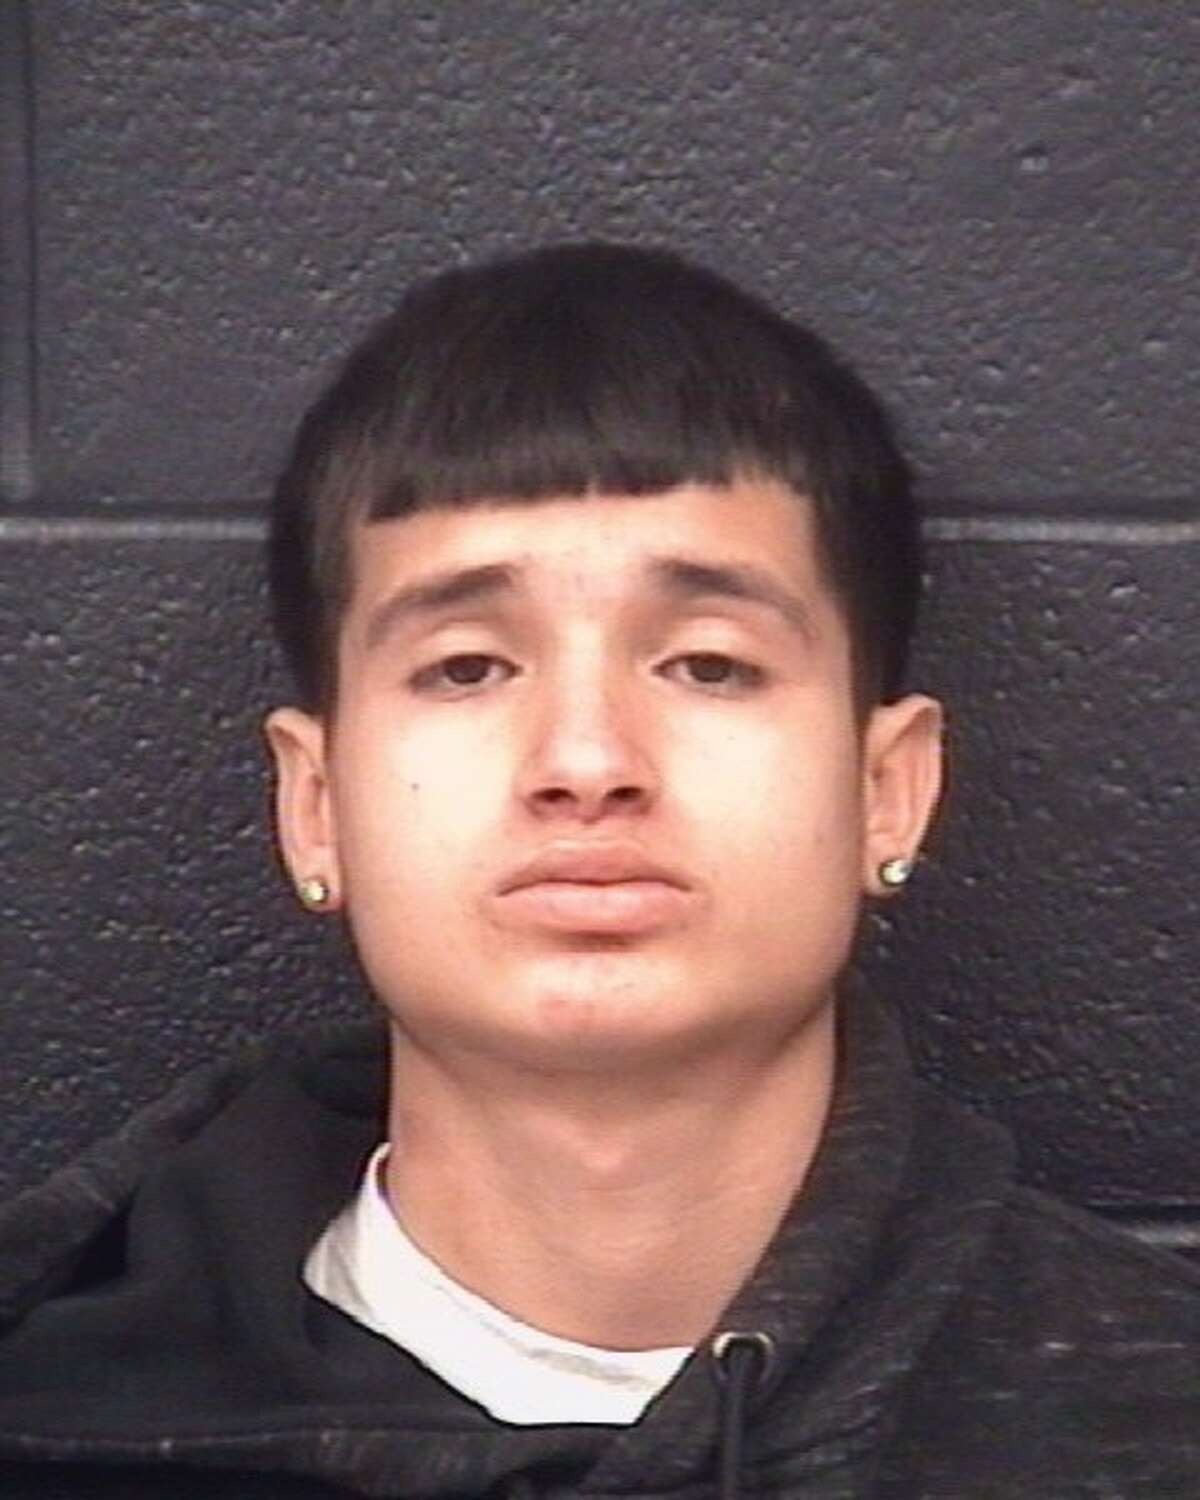 Michael David Coss, 17, had an outstanding warrant for aggravated robbery.